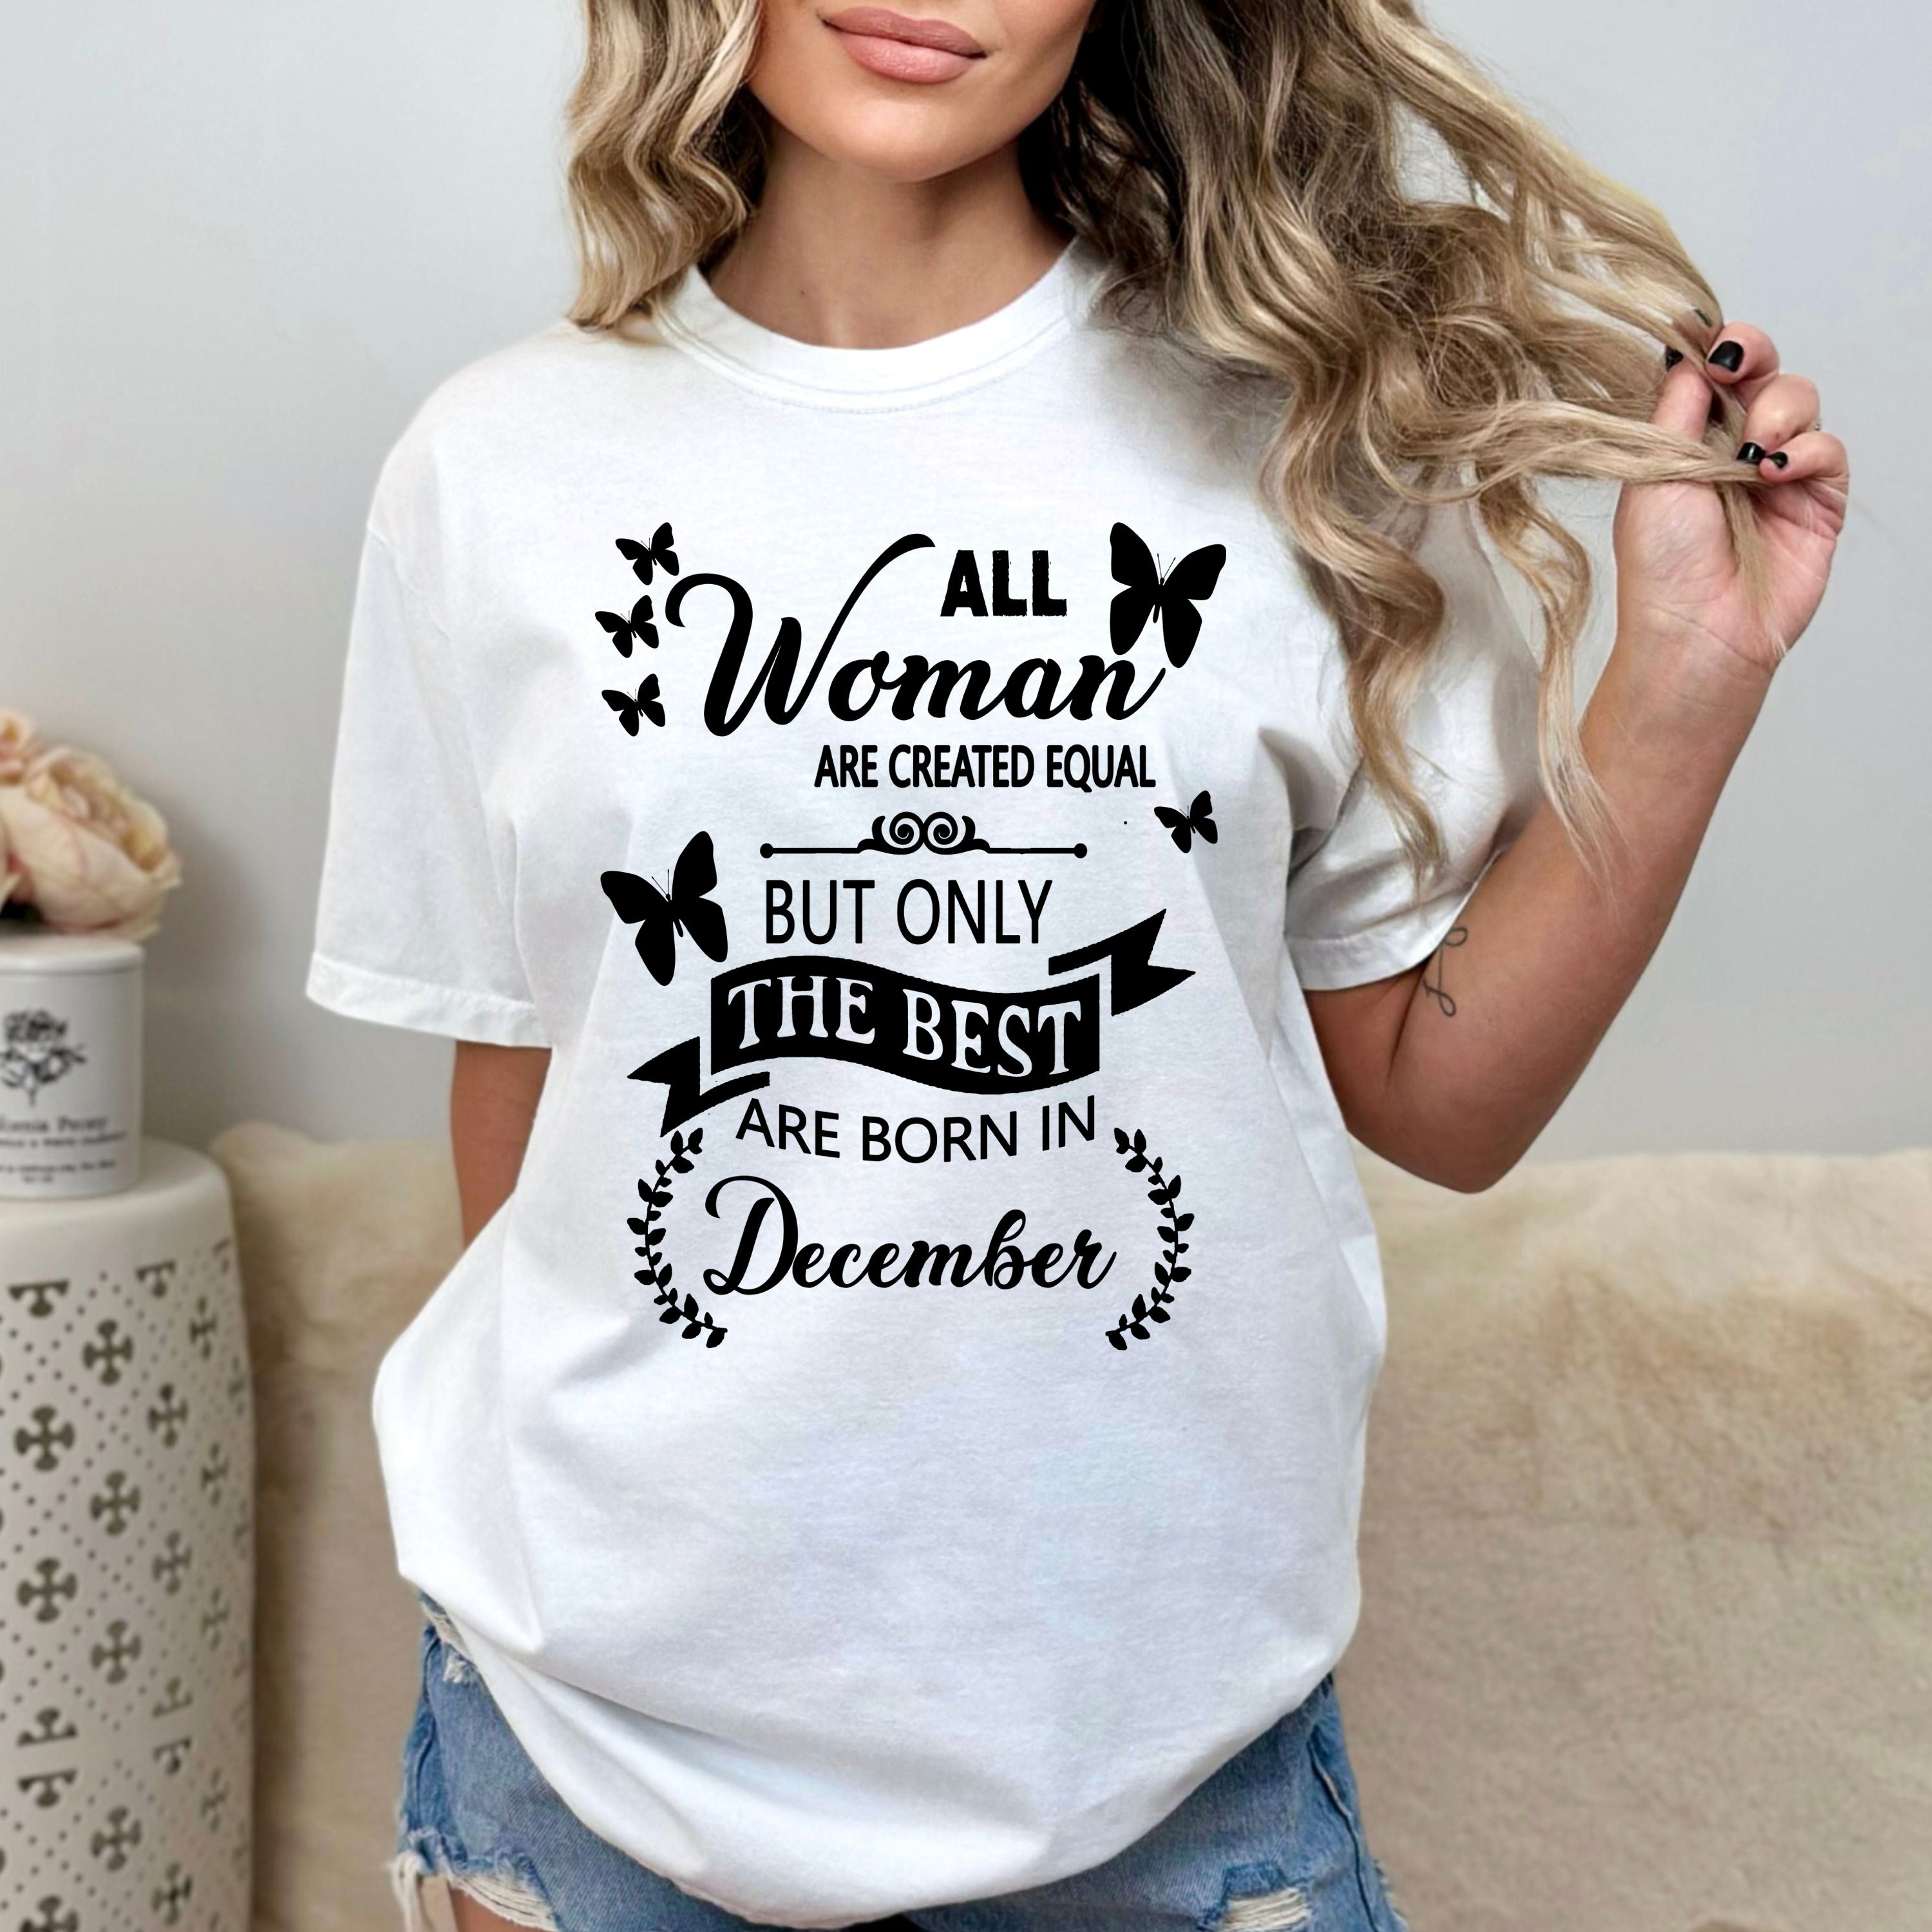 "All Woman Are Created Equal But The Best Are Born in December".